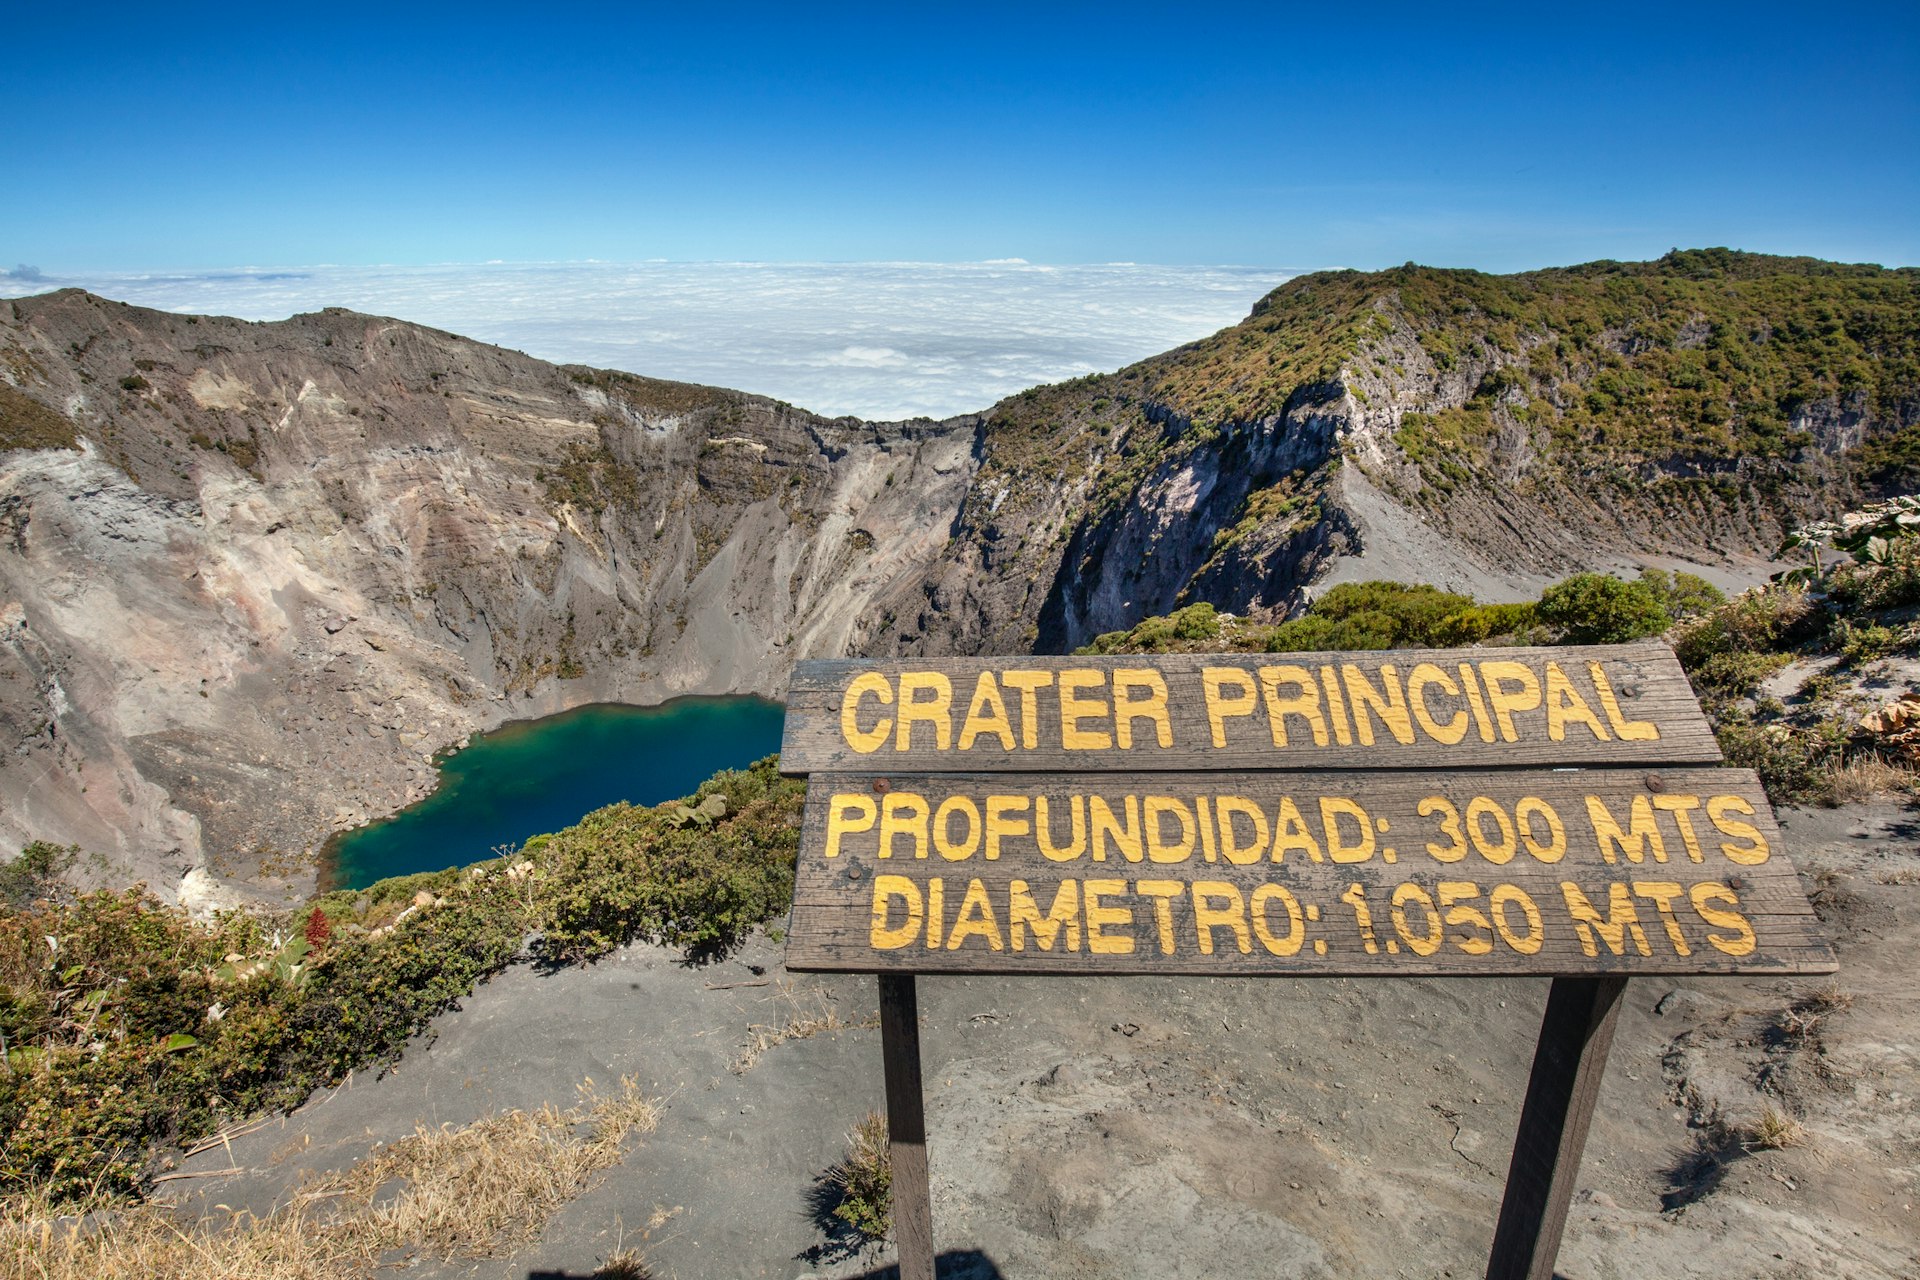 A sign at a volcanic crater filled with blue-green water that says "Crater Principal"